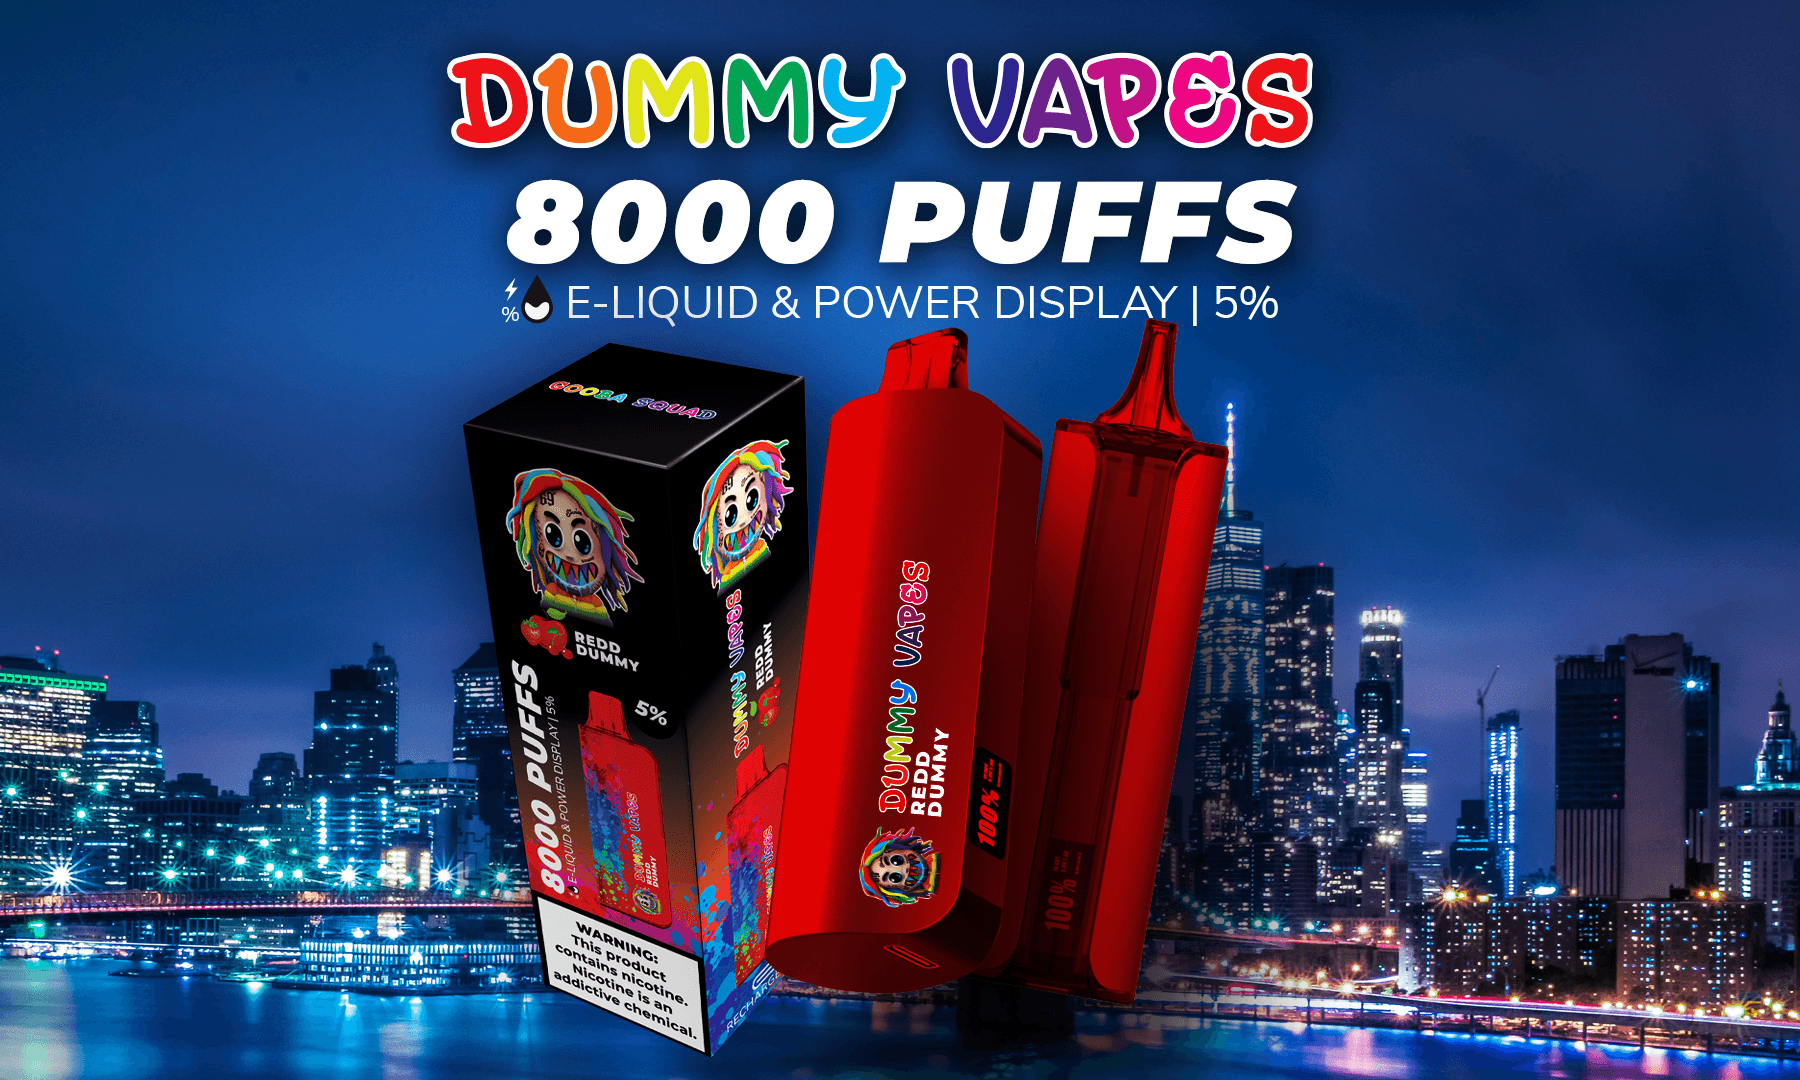 Dummy Vapes: The Ultimate Fusion of Music, Style, and Vaping, Brought to You by Rapper 6ix9ine - Dummy Vapes